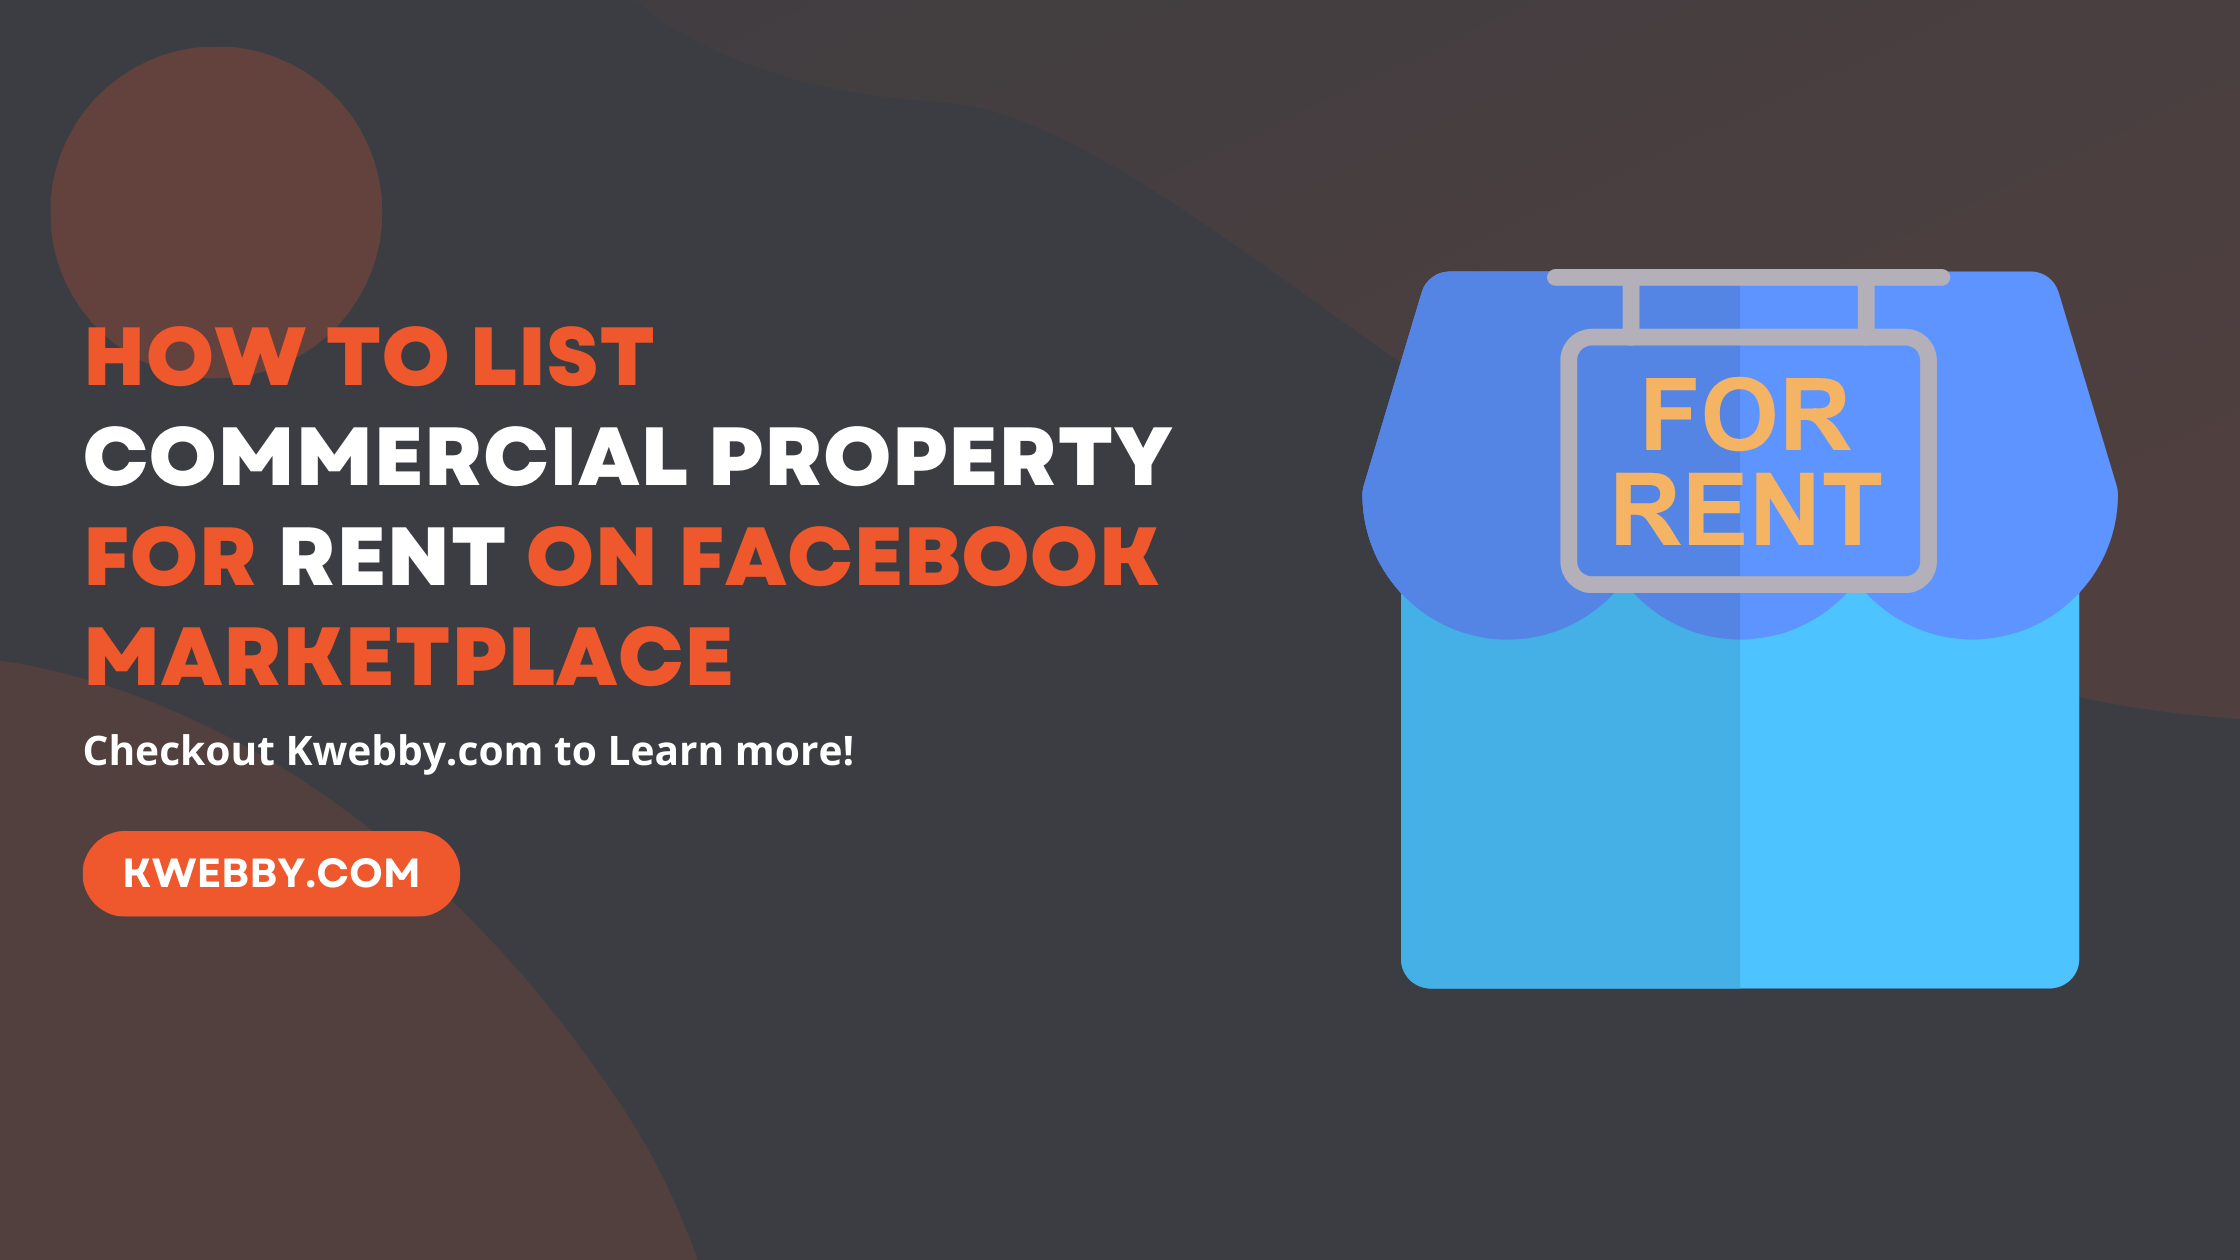 How to List Commercial Property for Rent on Facebook Marketplace